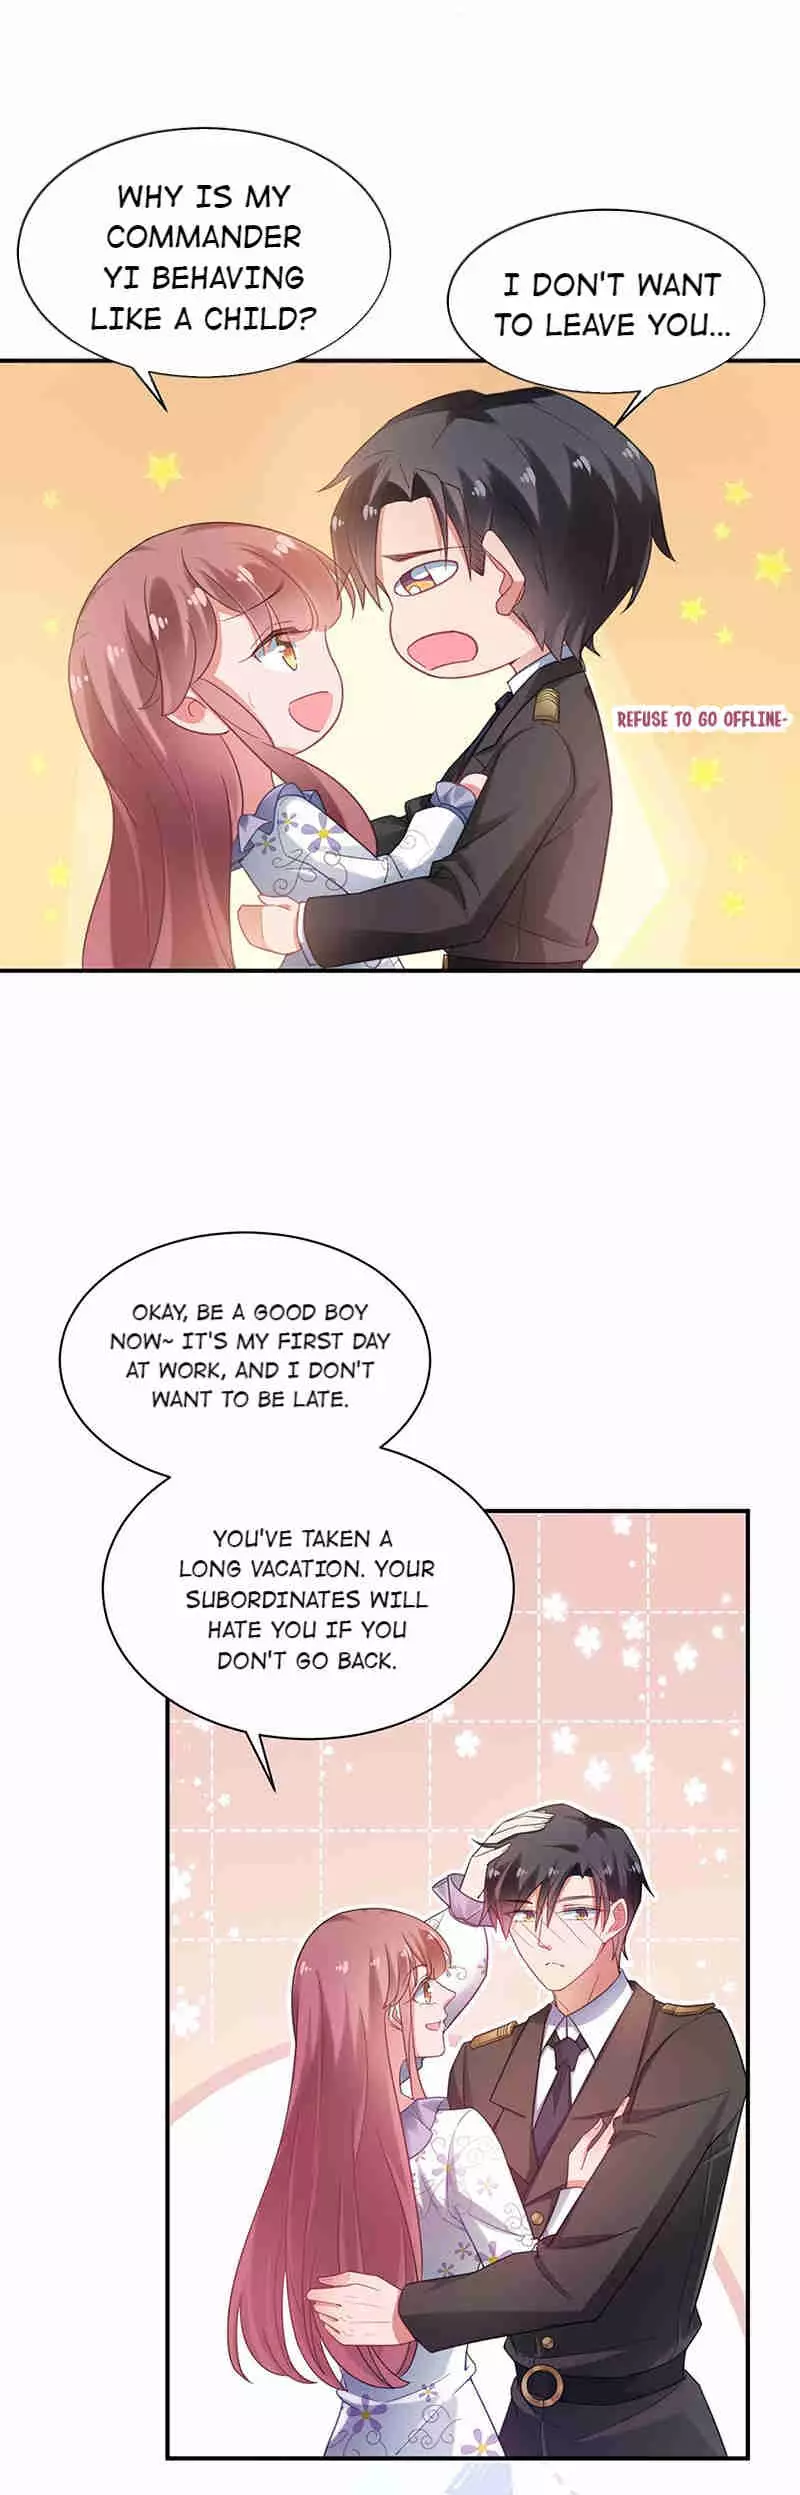 Heyday Darling: Young Master Yi’S Cute Little Wife - 61 page 3-19f8f2c5